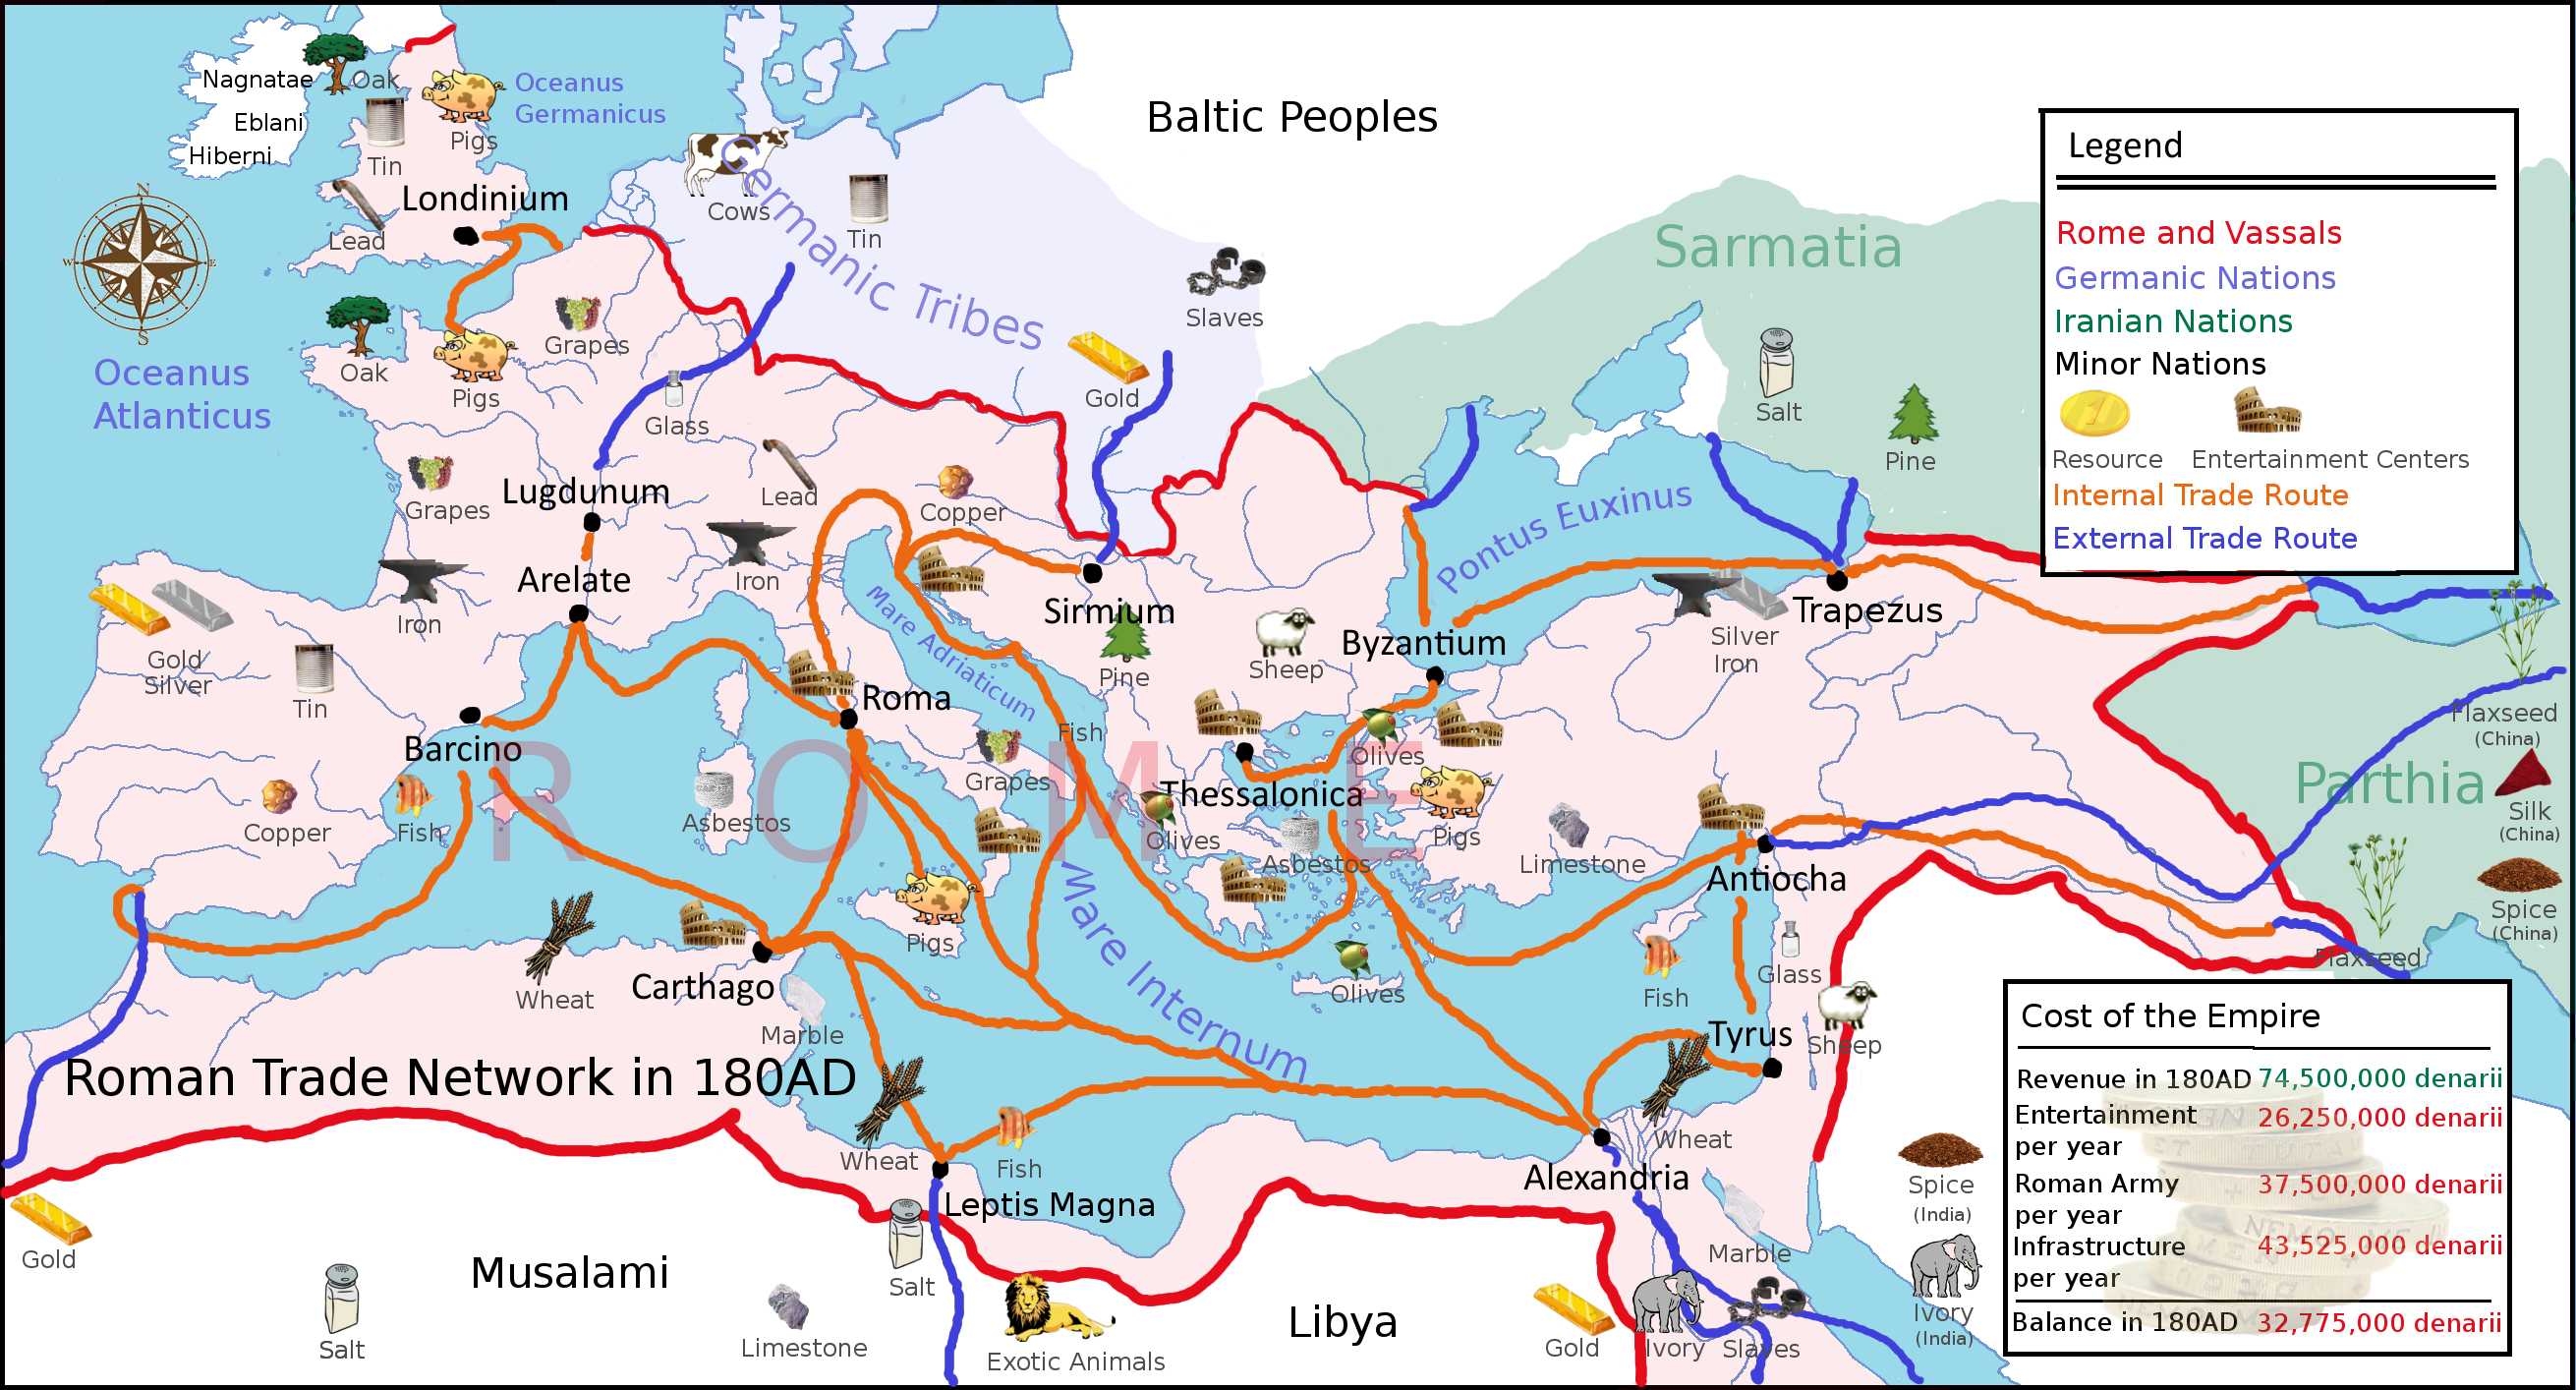 The Crusades Map Worksheet Answers together with Rometheeternalcity1011 Roman Republic